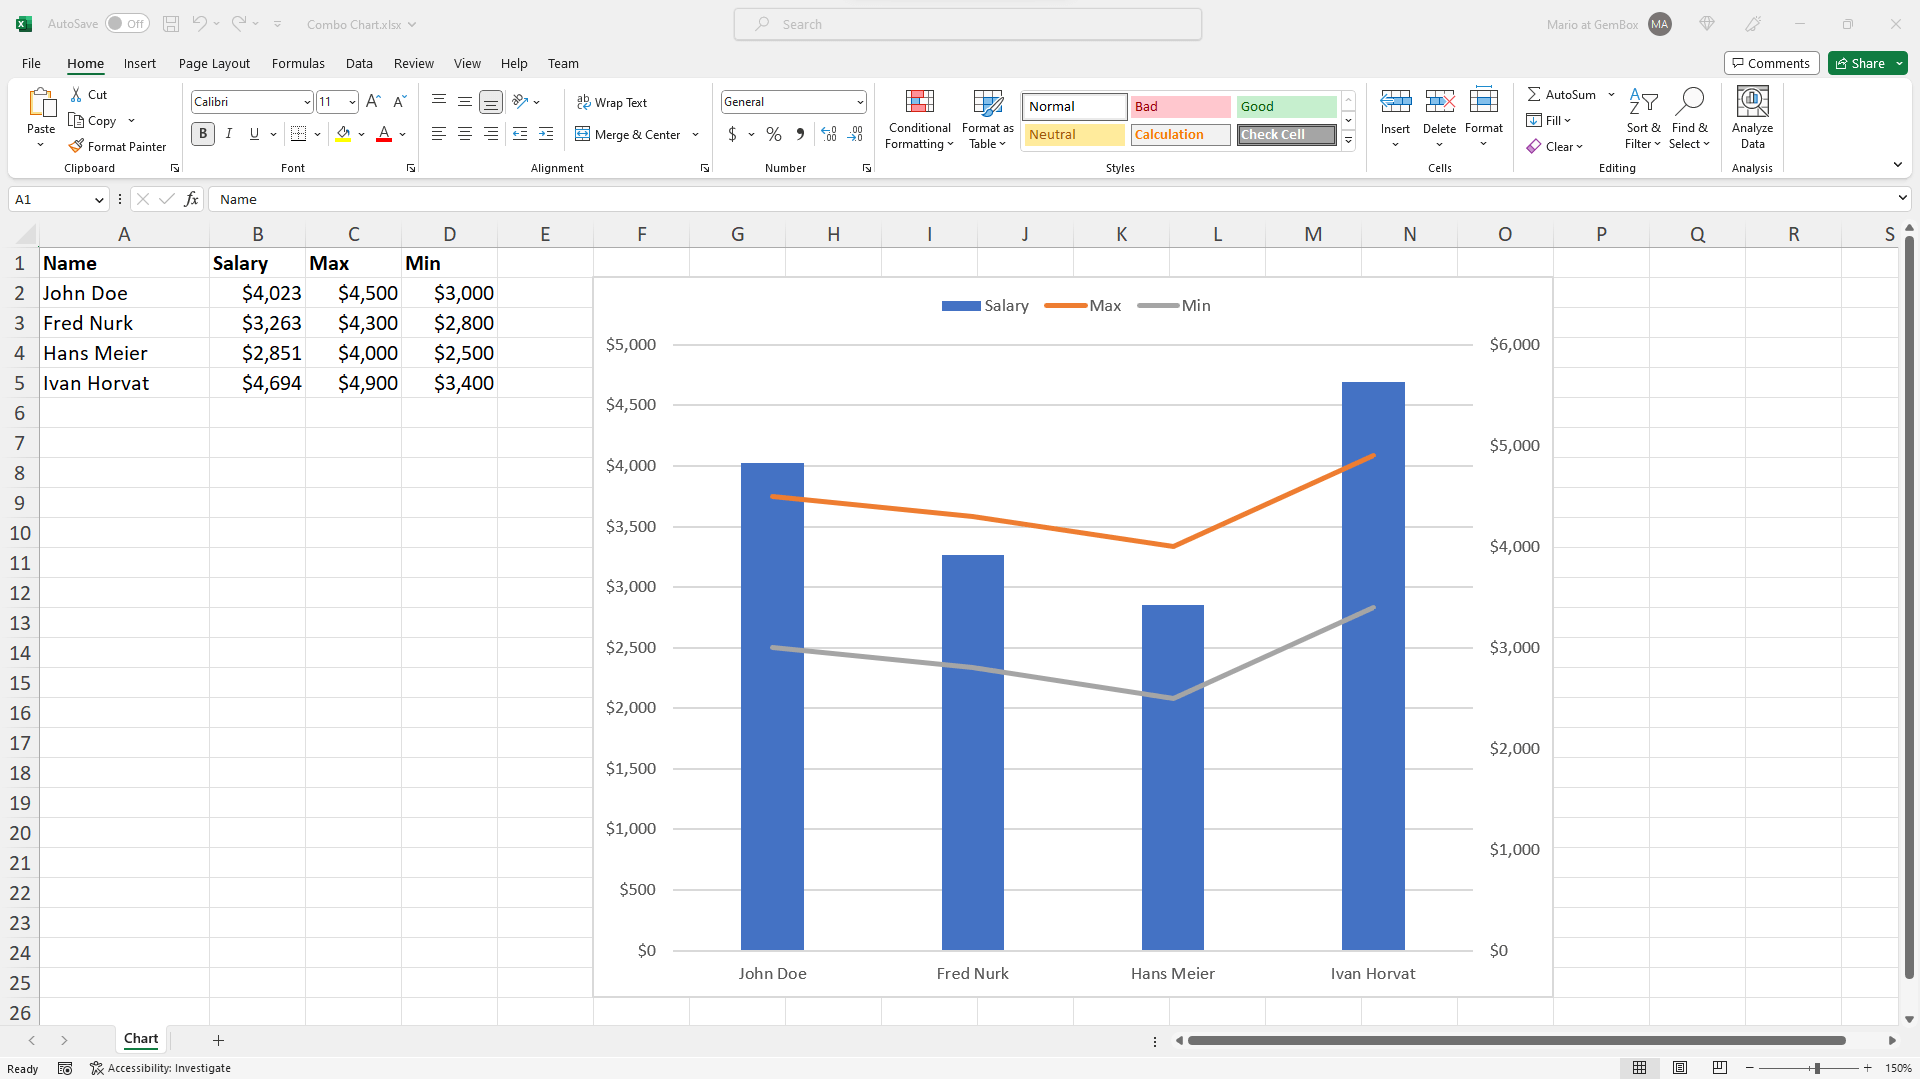 Excel combo chart created in C# and VB.NET